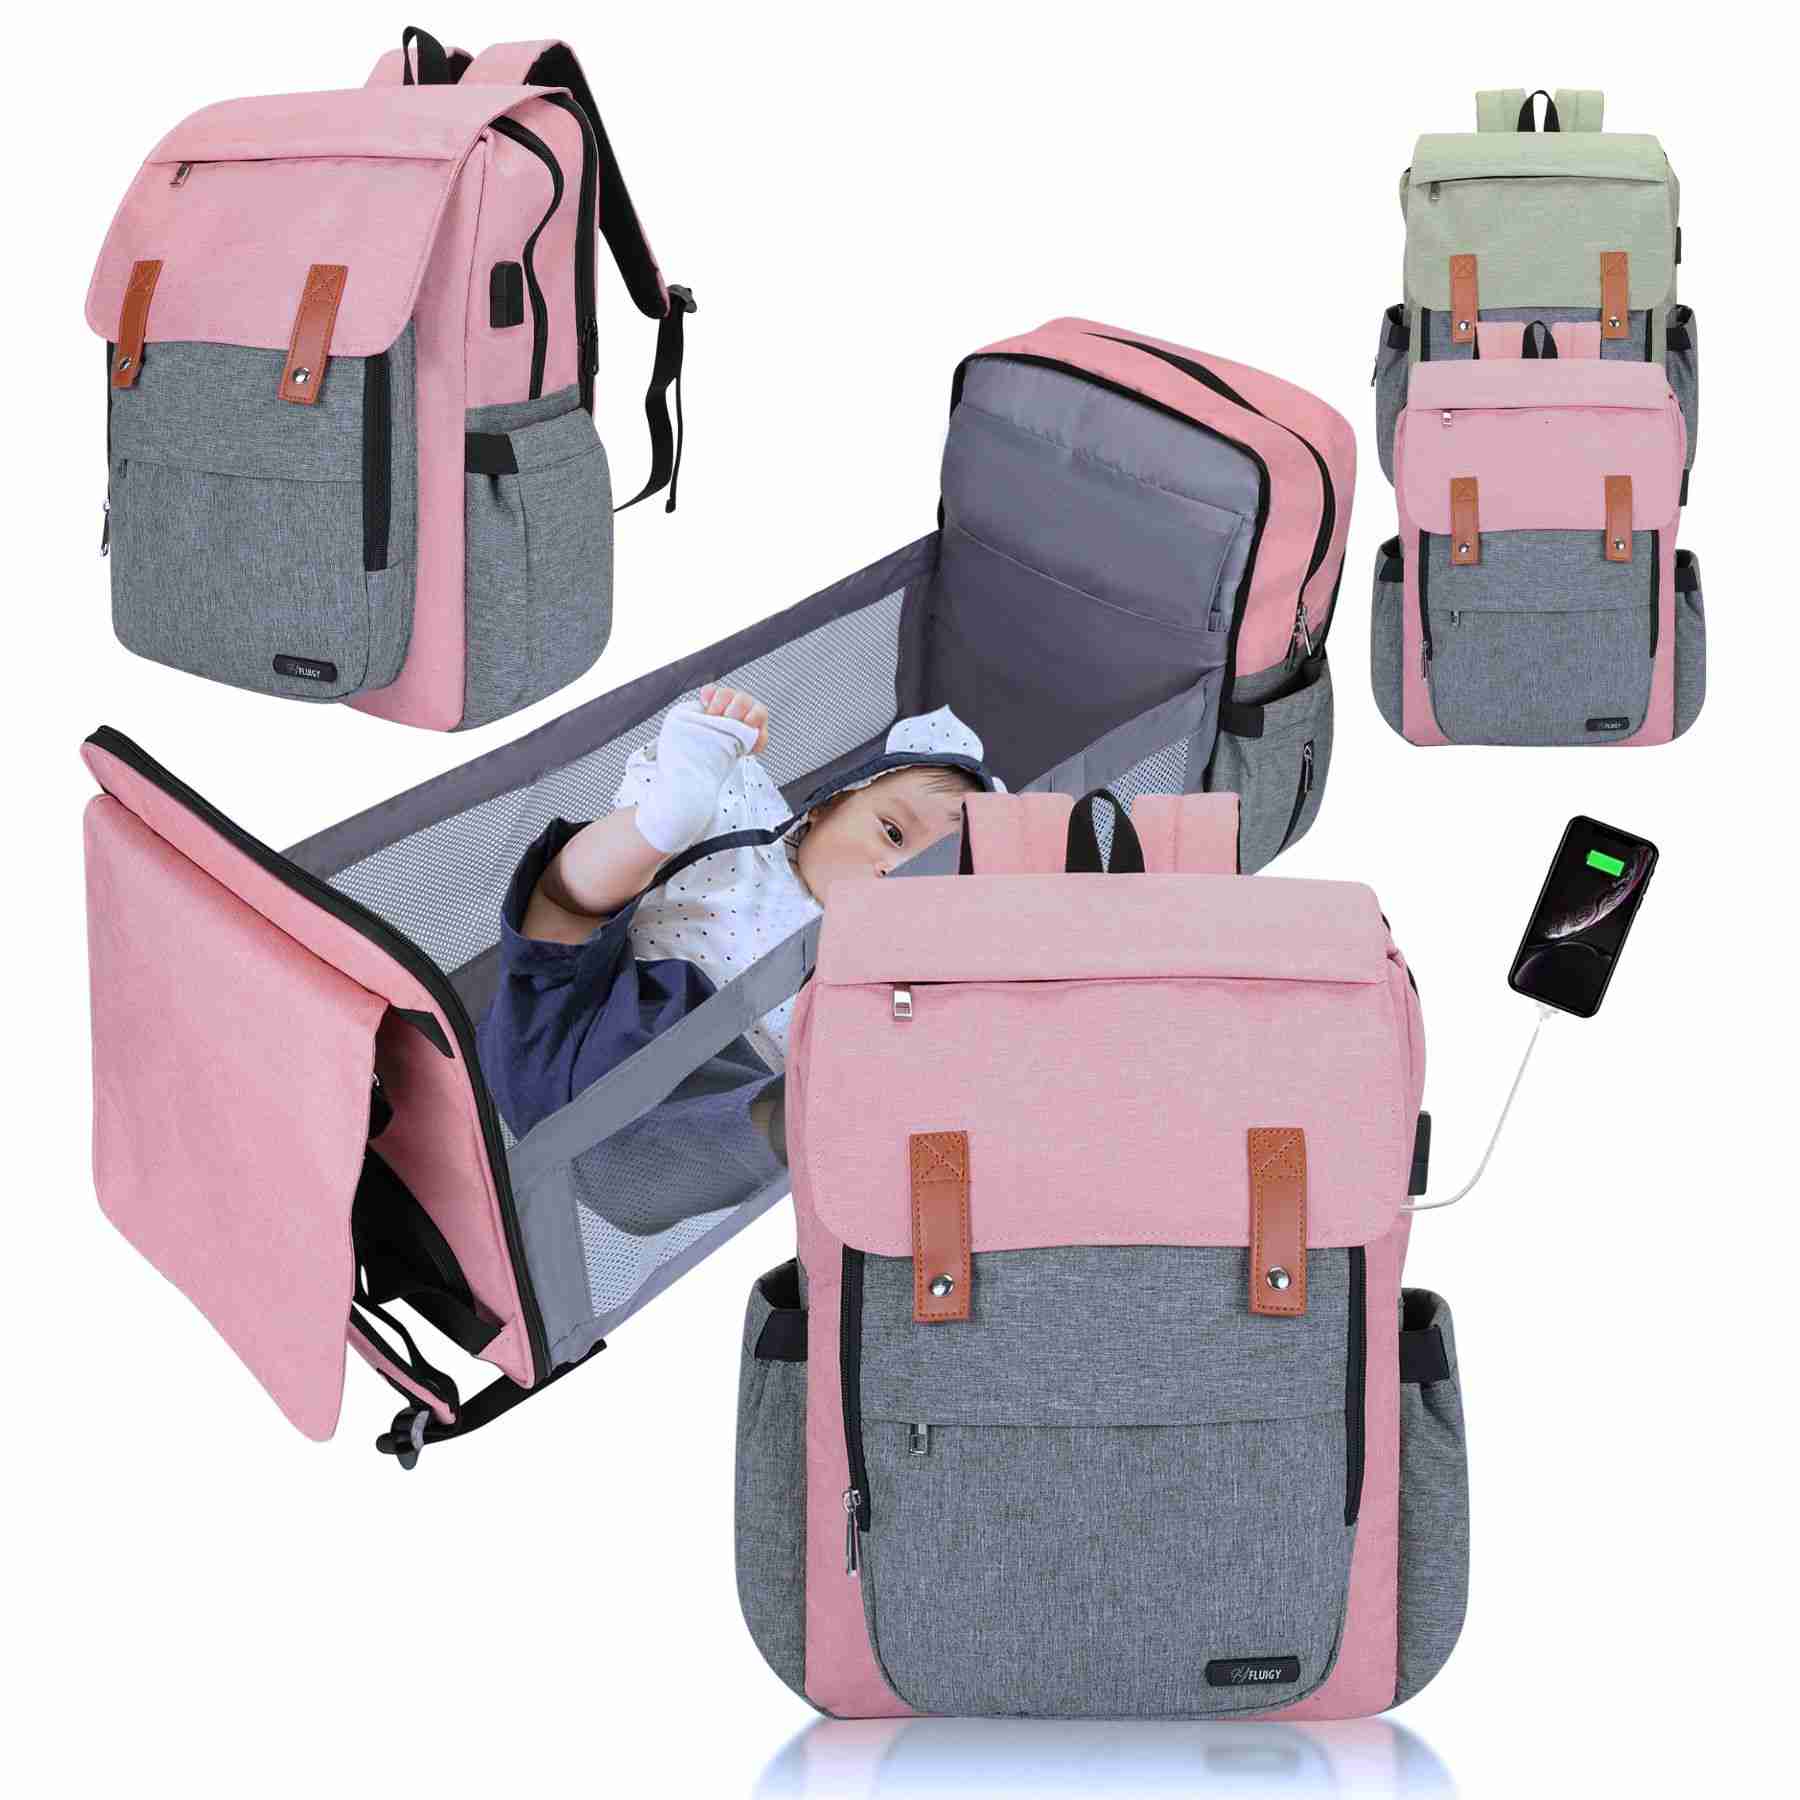 diaper-bag-backpack-baby-shower-gift-toy for cheap